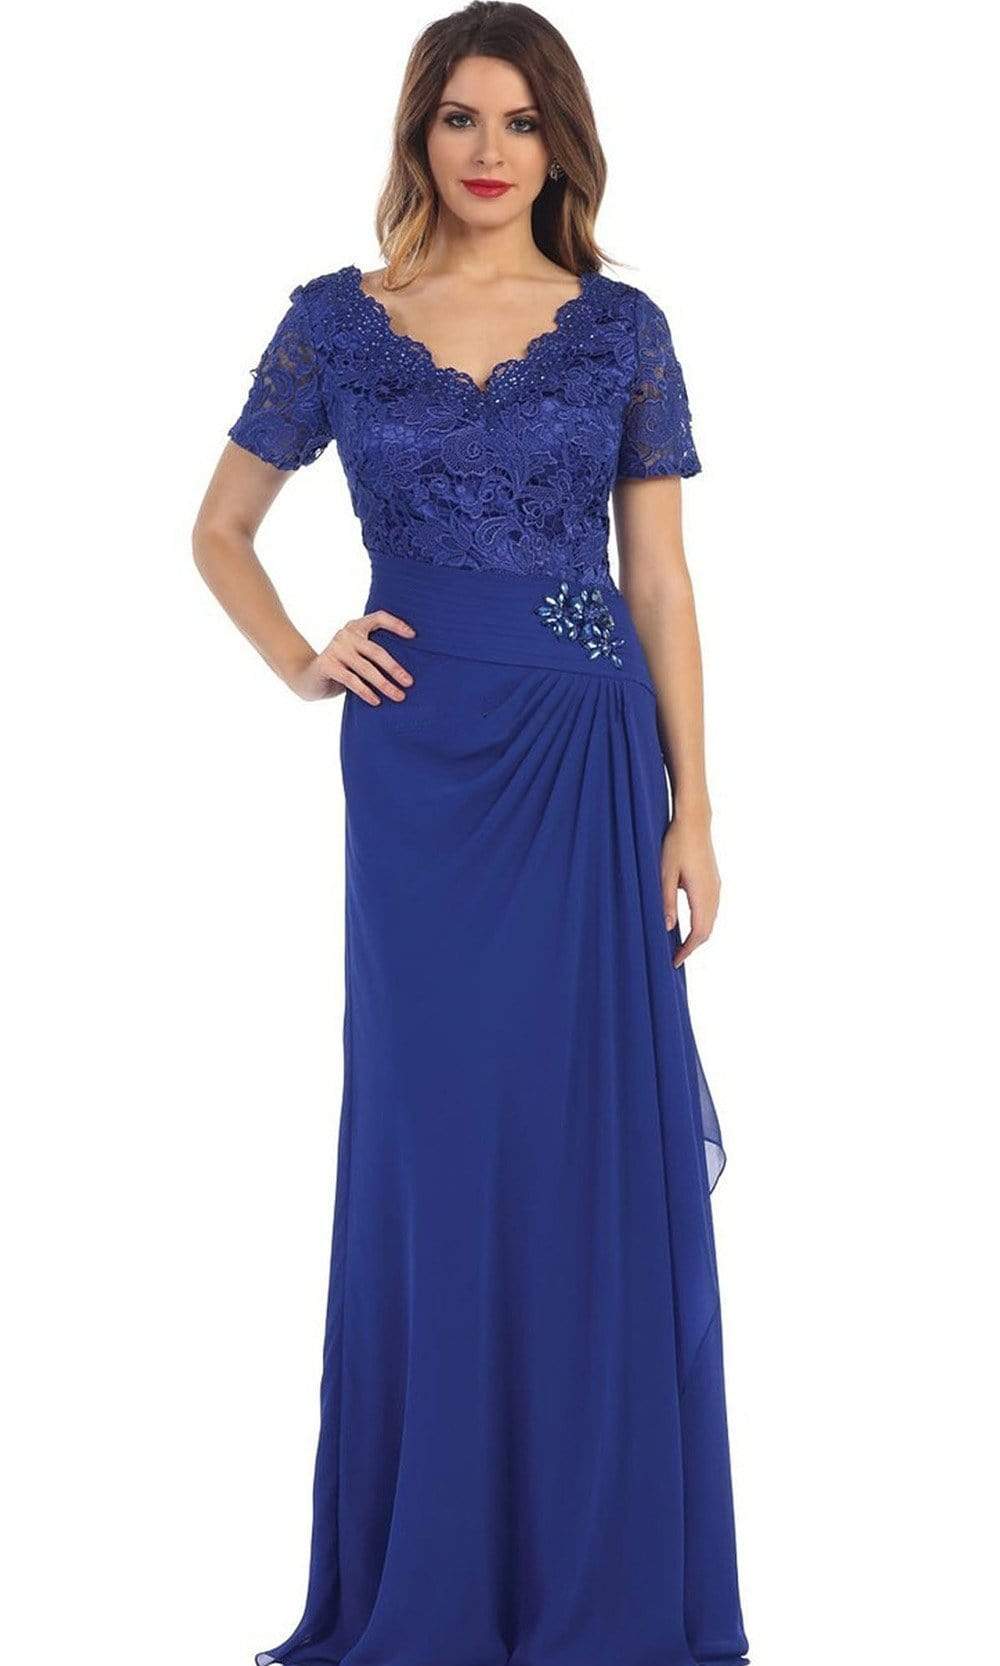 Image of May Queen - Lace Scalloped V-neck Sheath Evening Dress